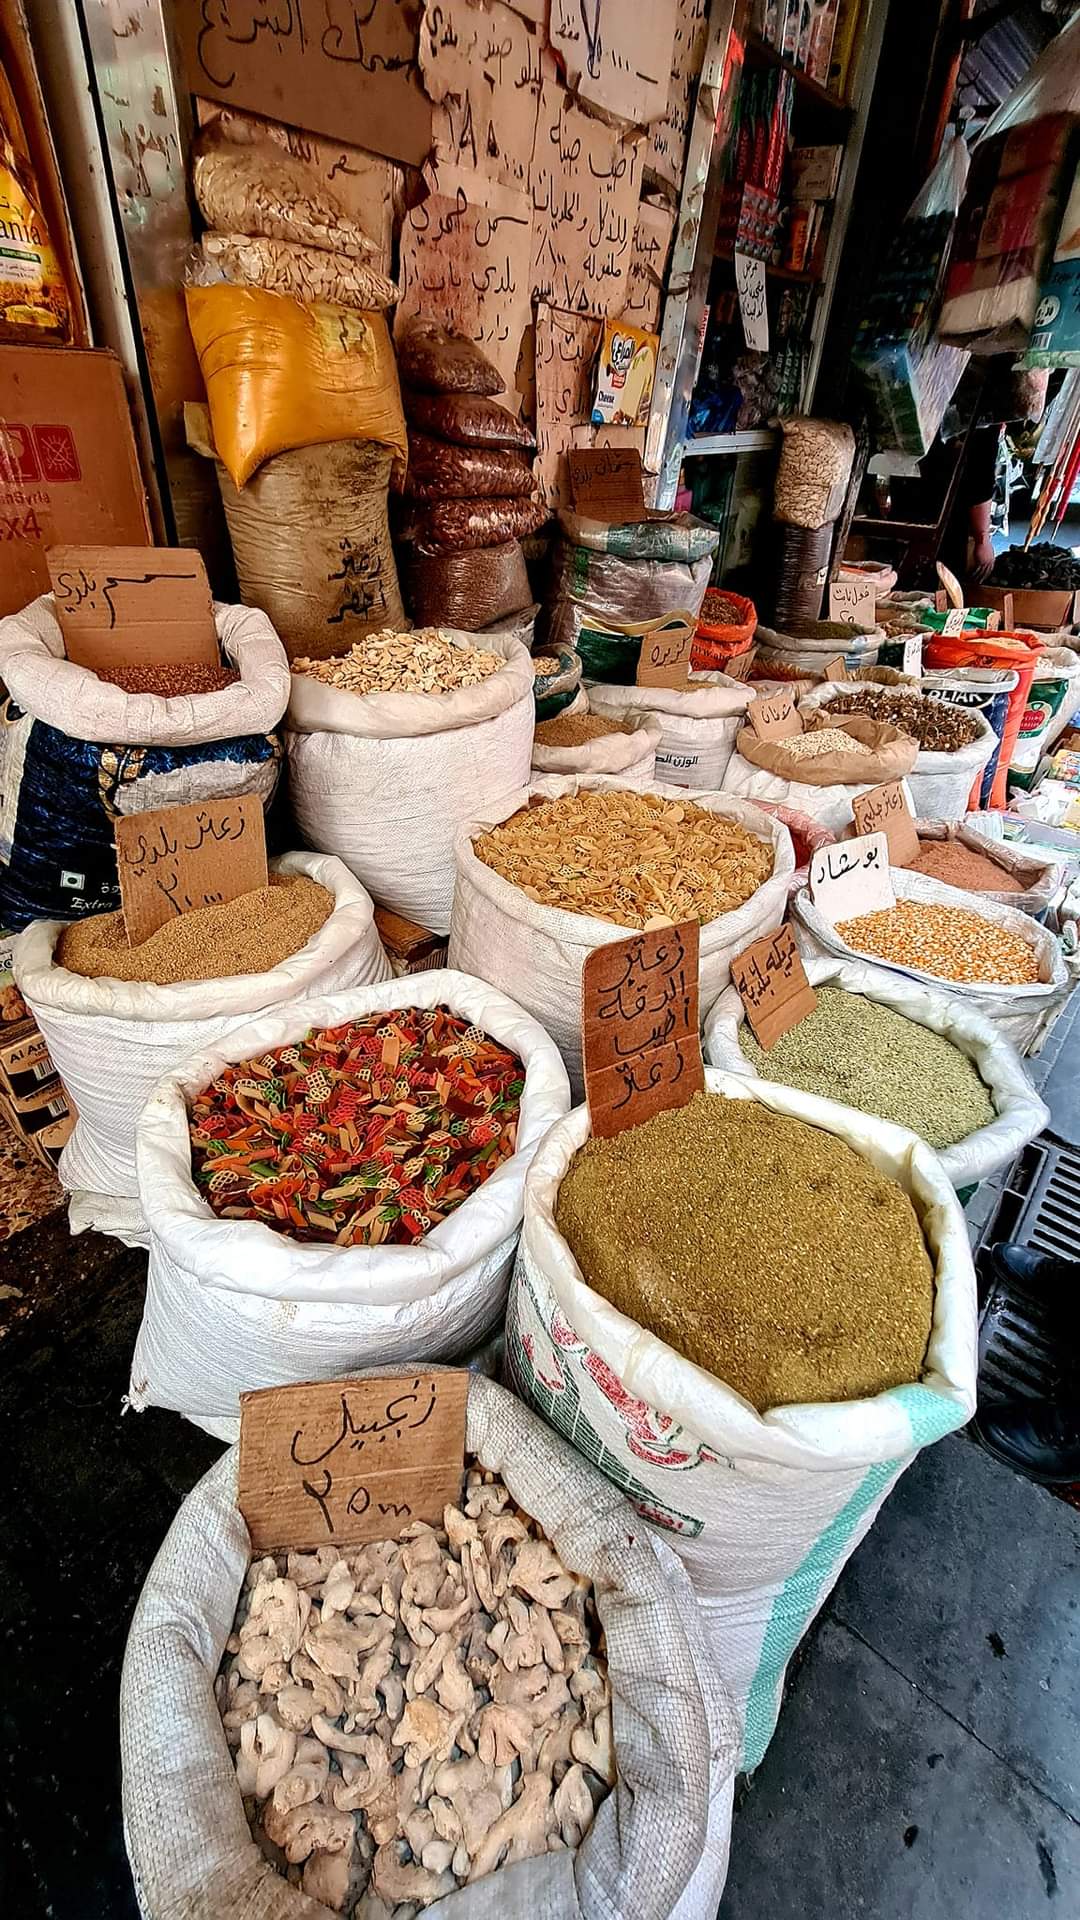 A spice stall in Sidon soul Lebanon